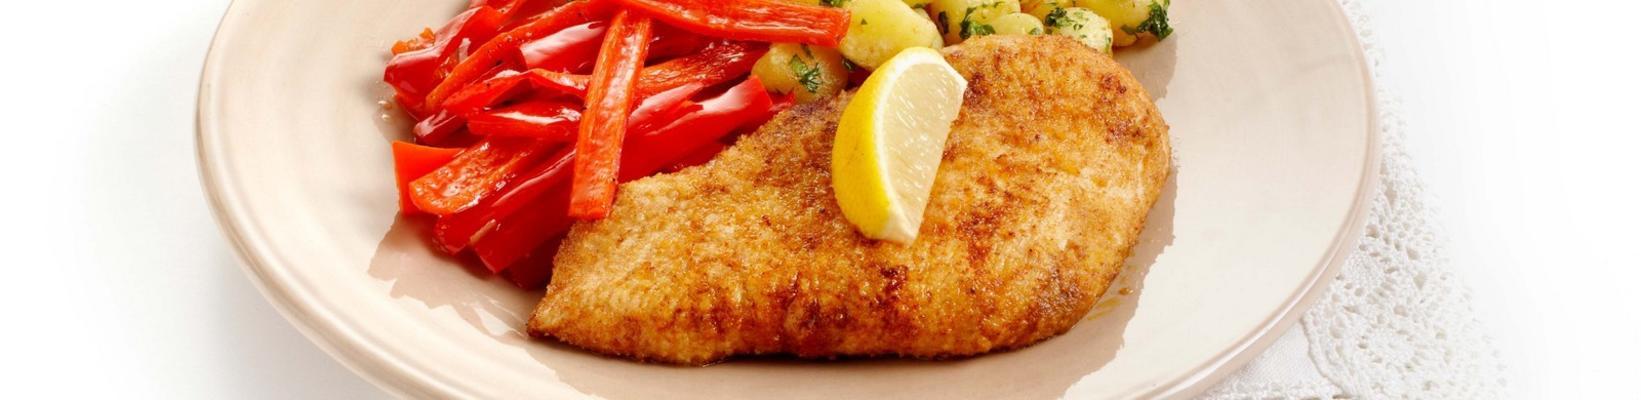 turkey schnitzel with red peppers and parsley jars